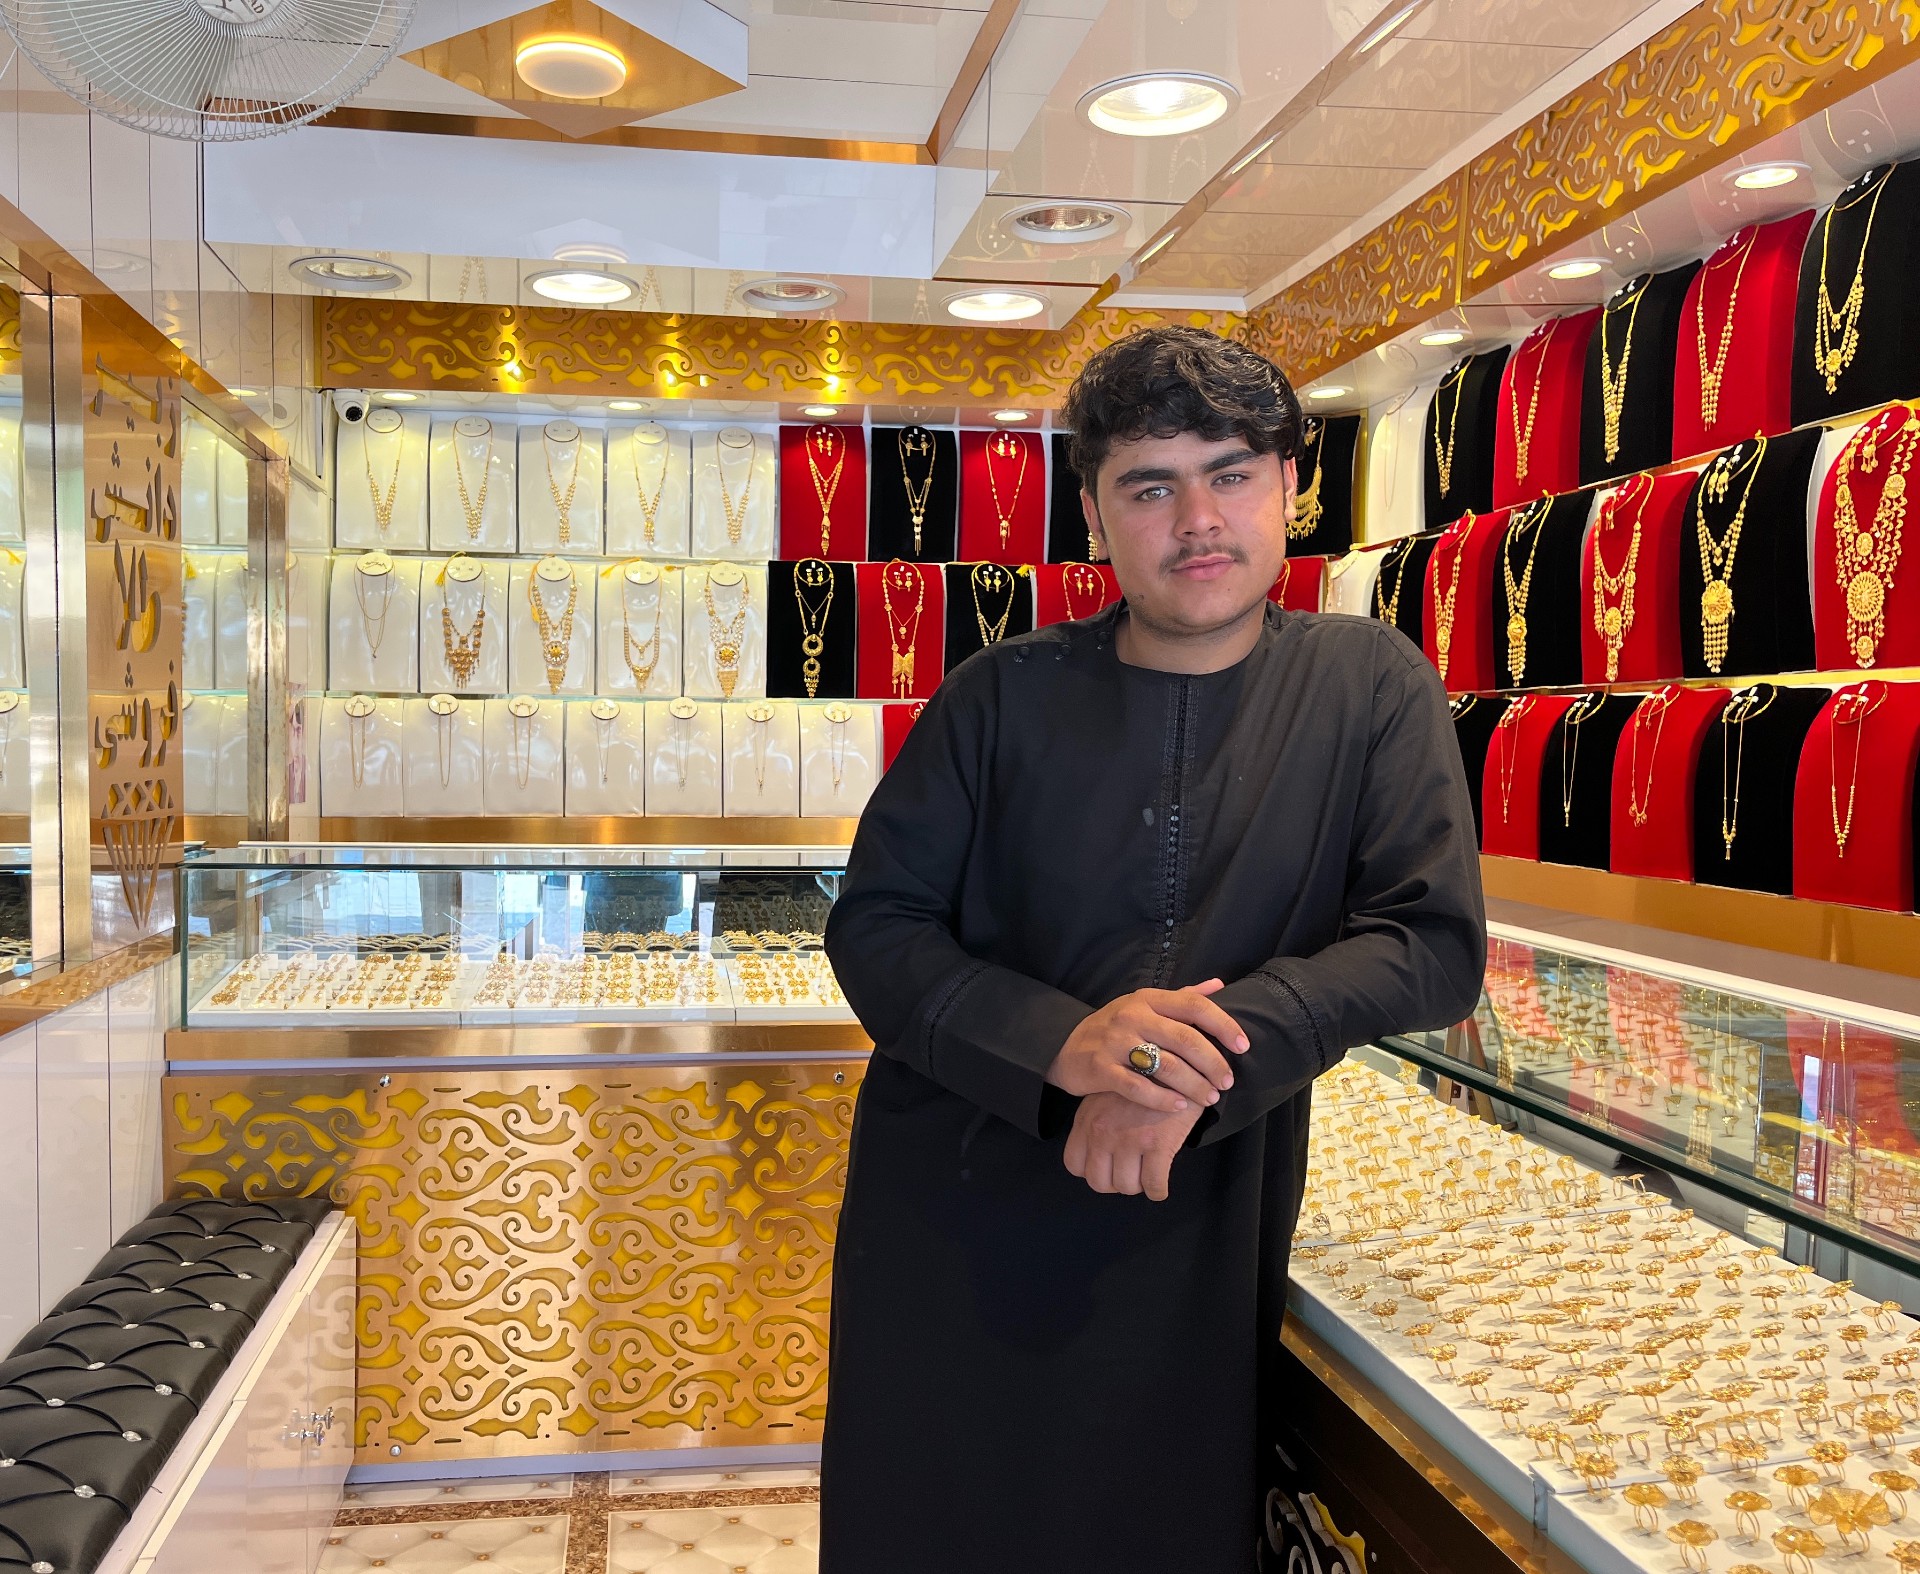 Mohammad Sajed says some Afghans are selling their gold to try and raise funds to make ends meet (MEE/Ali M Latifi)